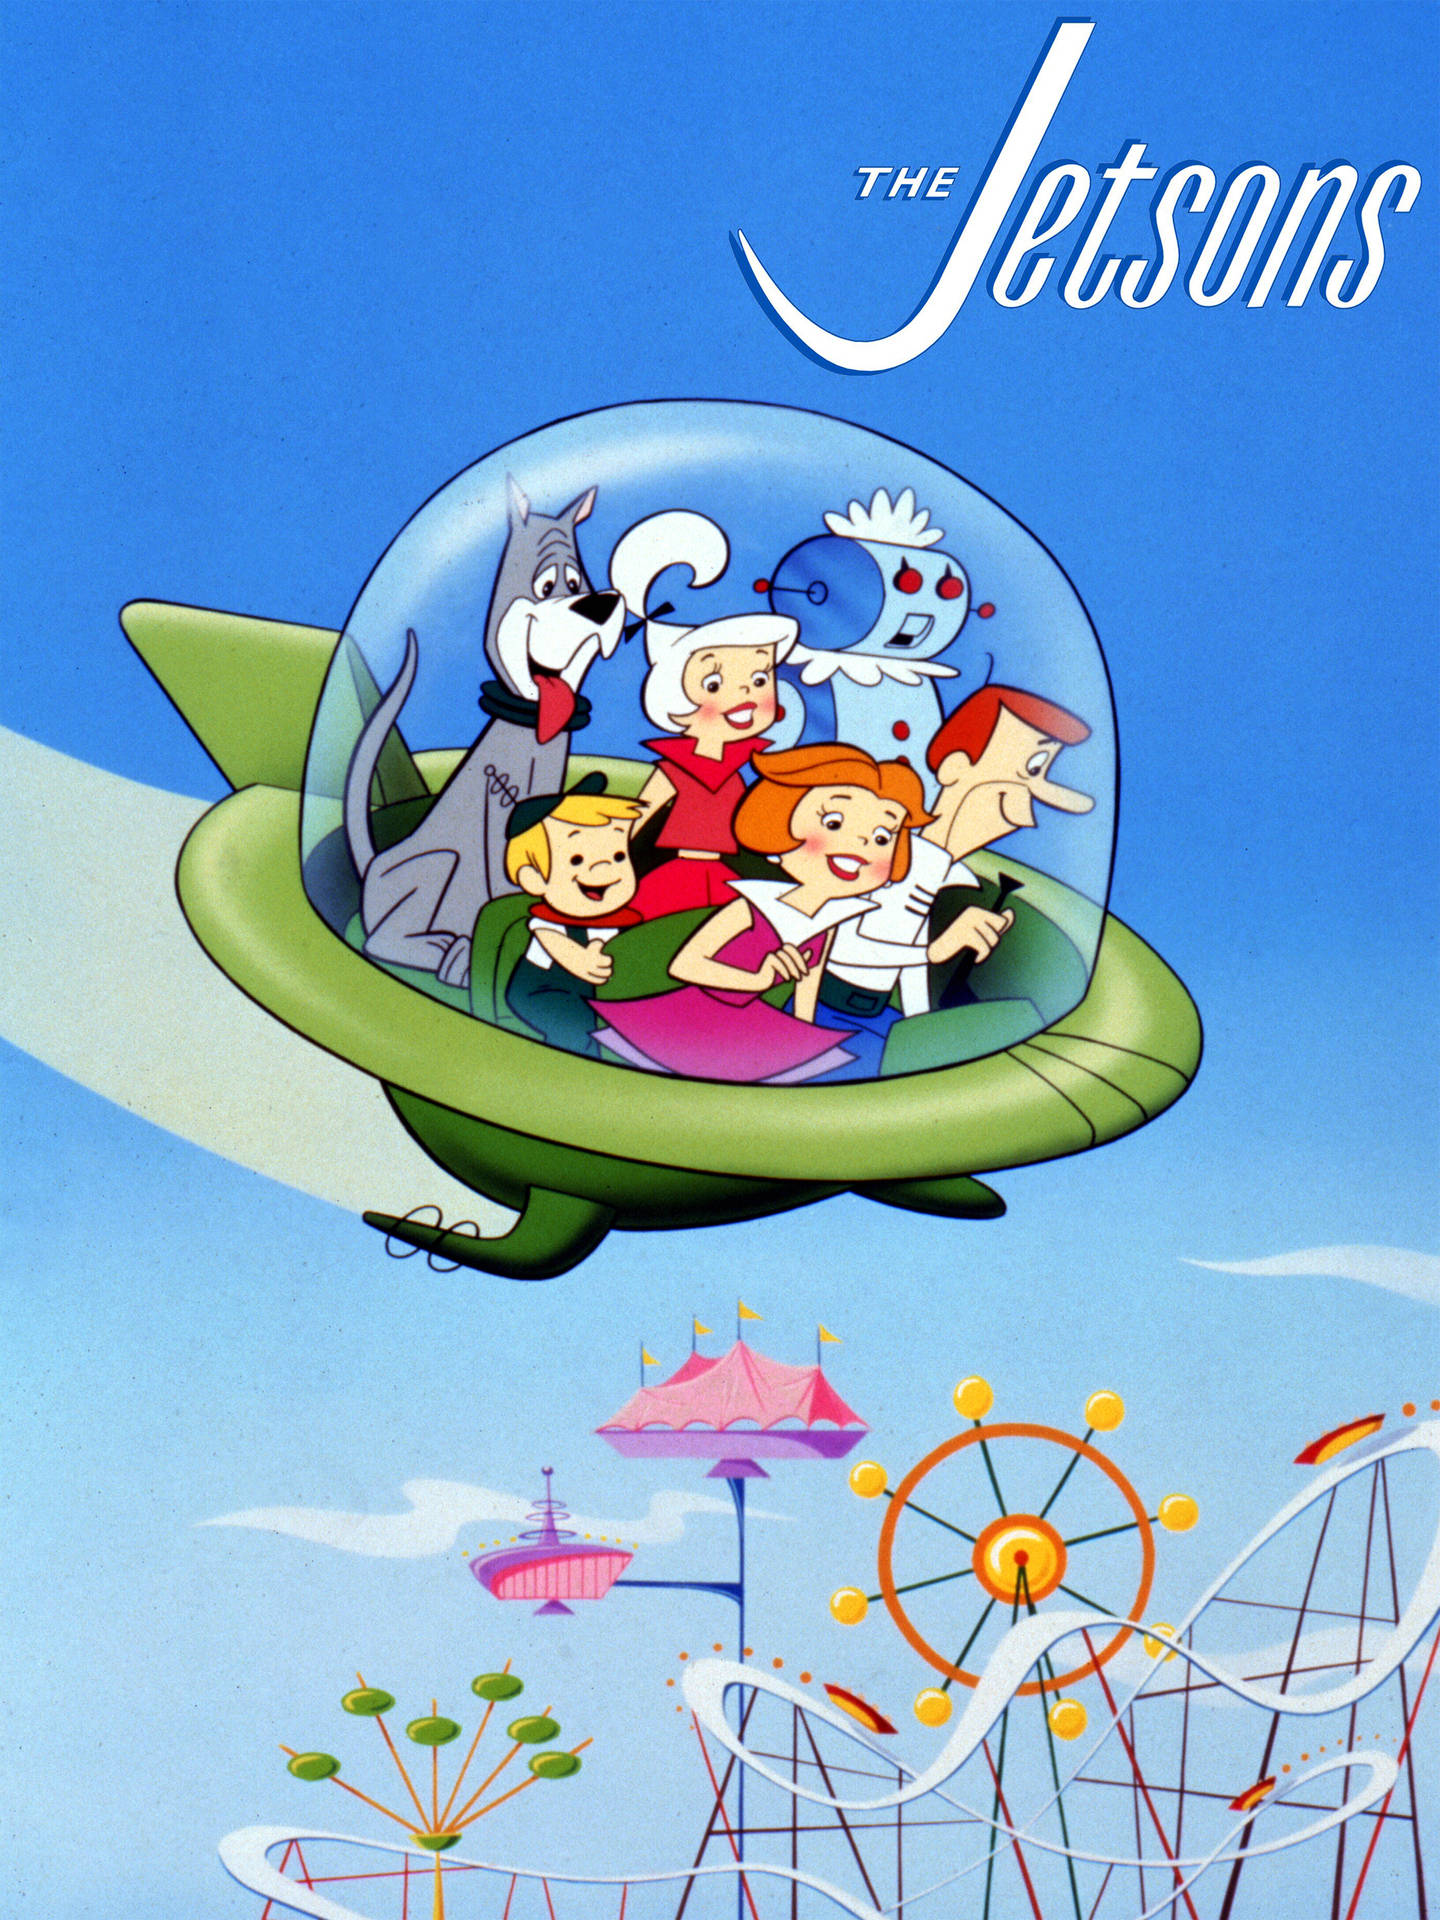 The Jetsons Animated Show Poster Wallpaper